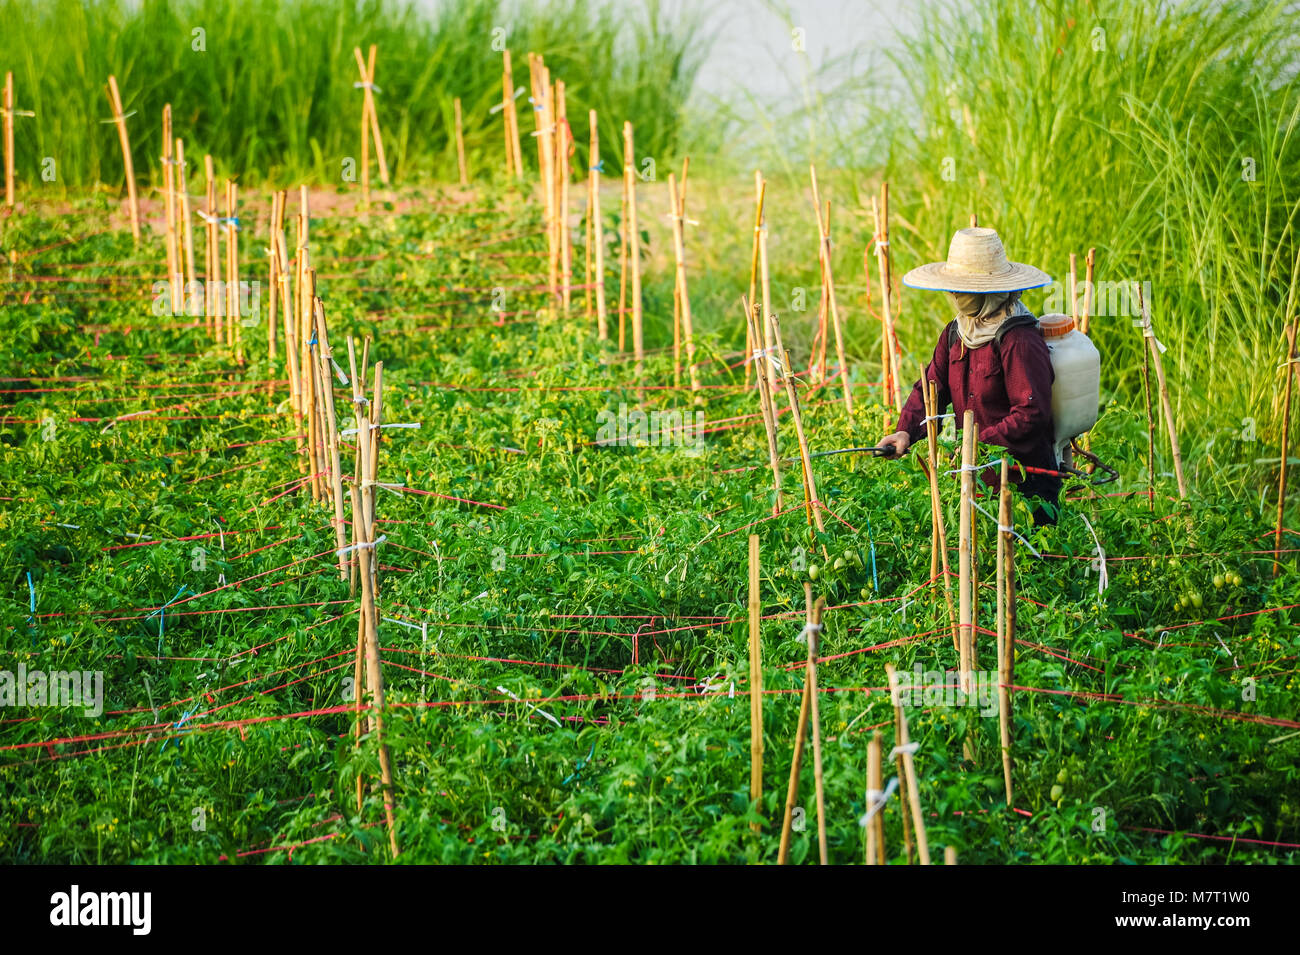 Udonthani, Thailand - December 9, 2012: Un-identified woman farmer spraying insecticide in vegetable farm in rural of Thailand Stock Photo